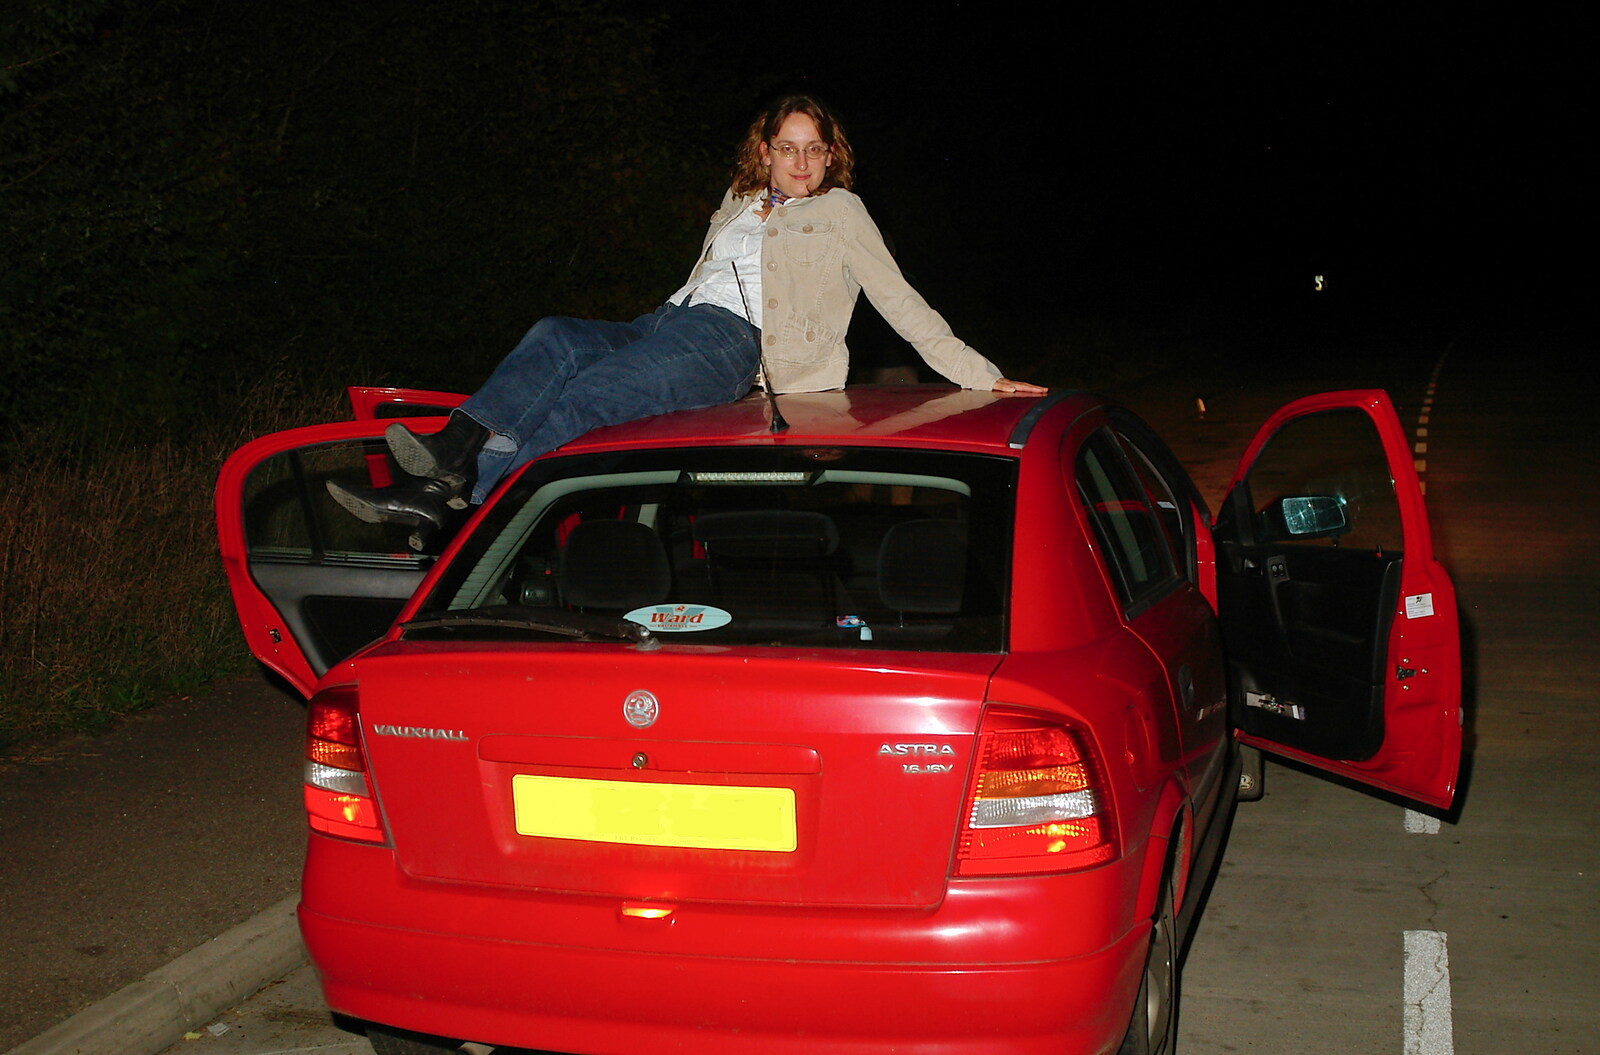 Sue lounges on the roof of Bill's car from The Banham Barrel Beer Bash, Banham, Norfolk - 17th September 2005